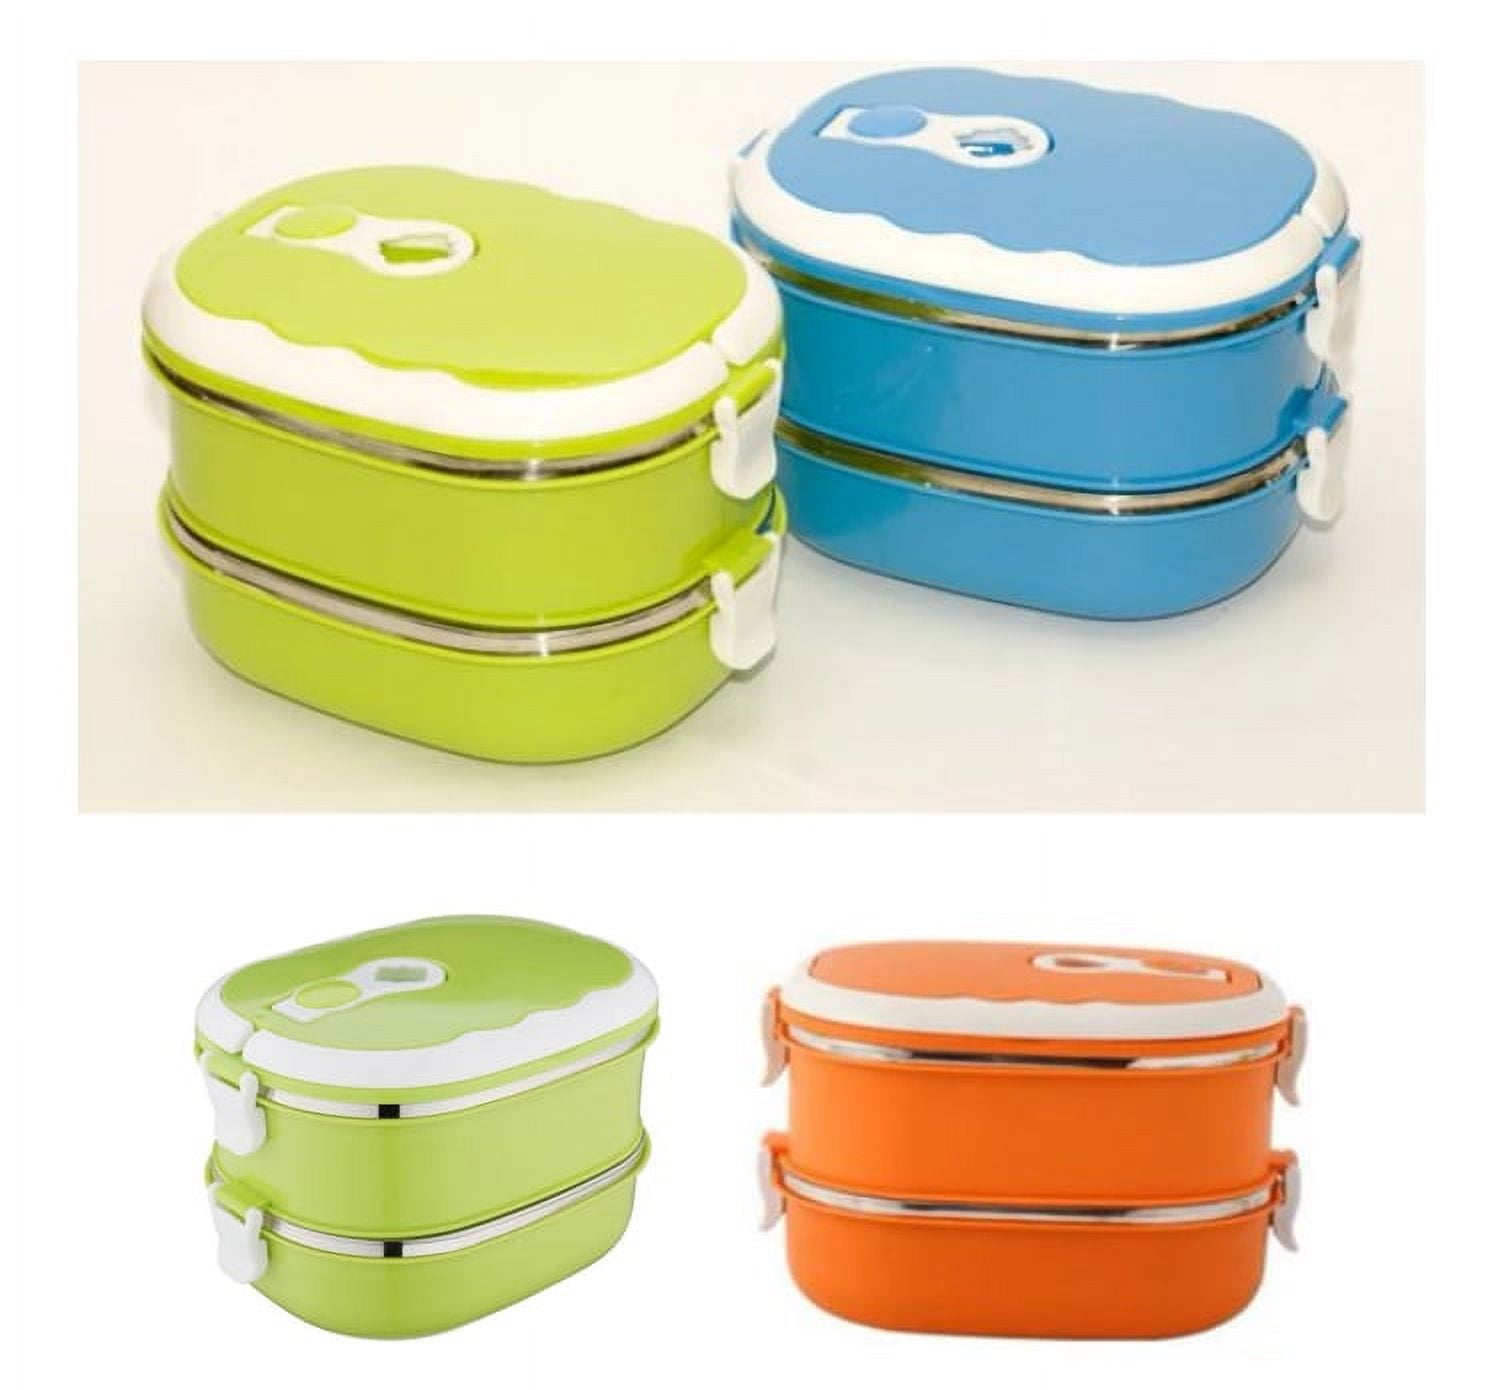 Lnkoo 2 Layer Food Warmer School Lunch Box, Portable Bento Thermal Insulated Food Container Stainless Steel Insulated Square Lunch Box for Children